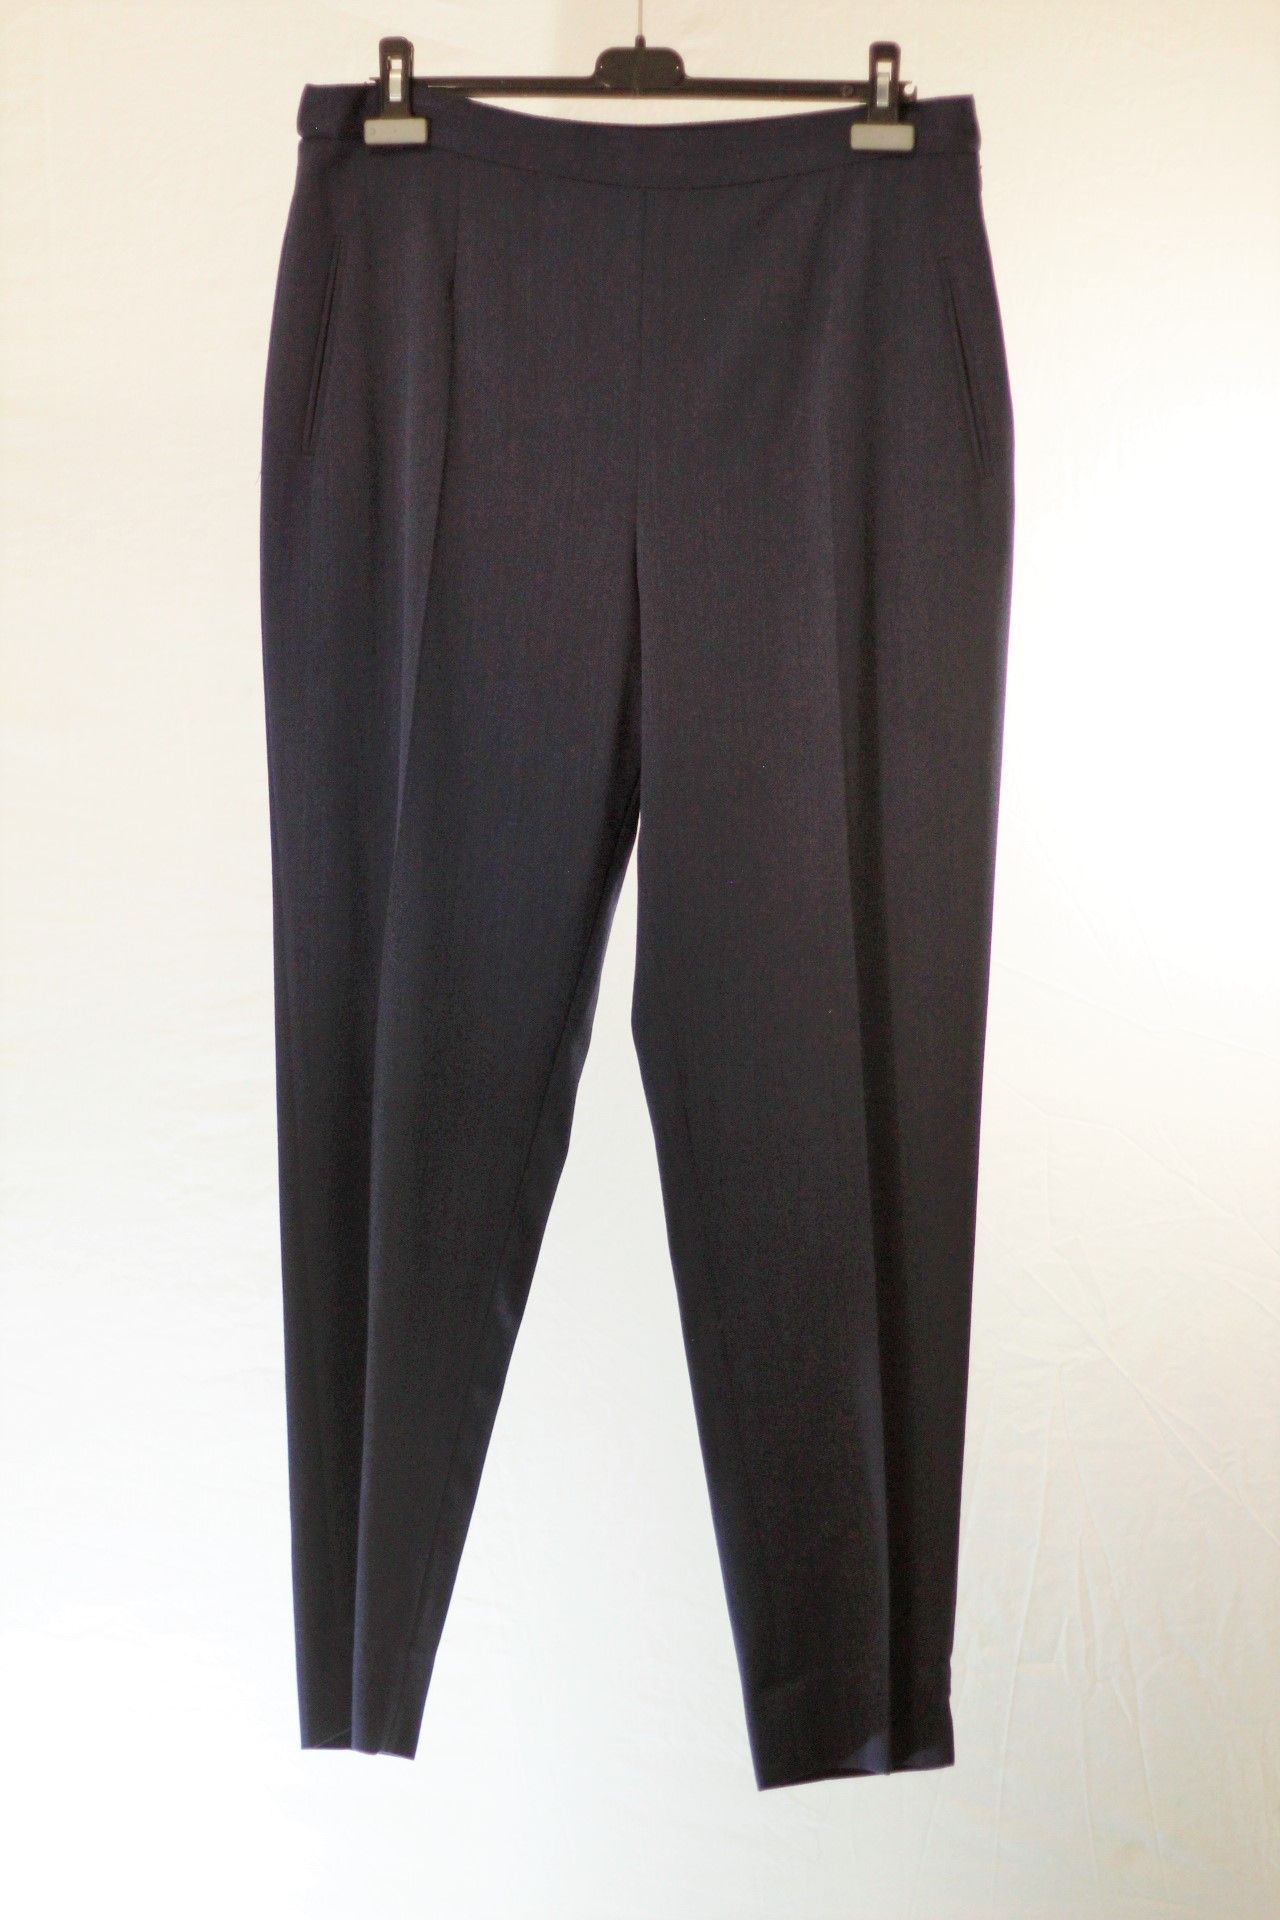 1 x Belvest Navy Trousers - Size: 26 - Material: Wool/ Cotton - From a High End Clothing Boutique In - Image 9 of 9